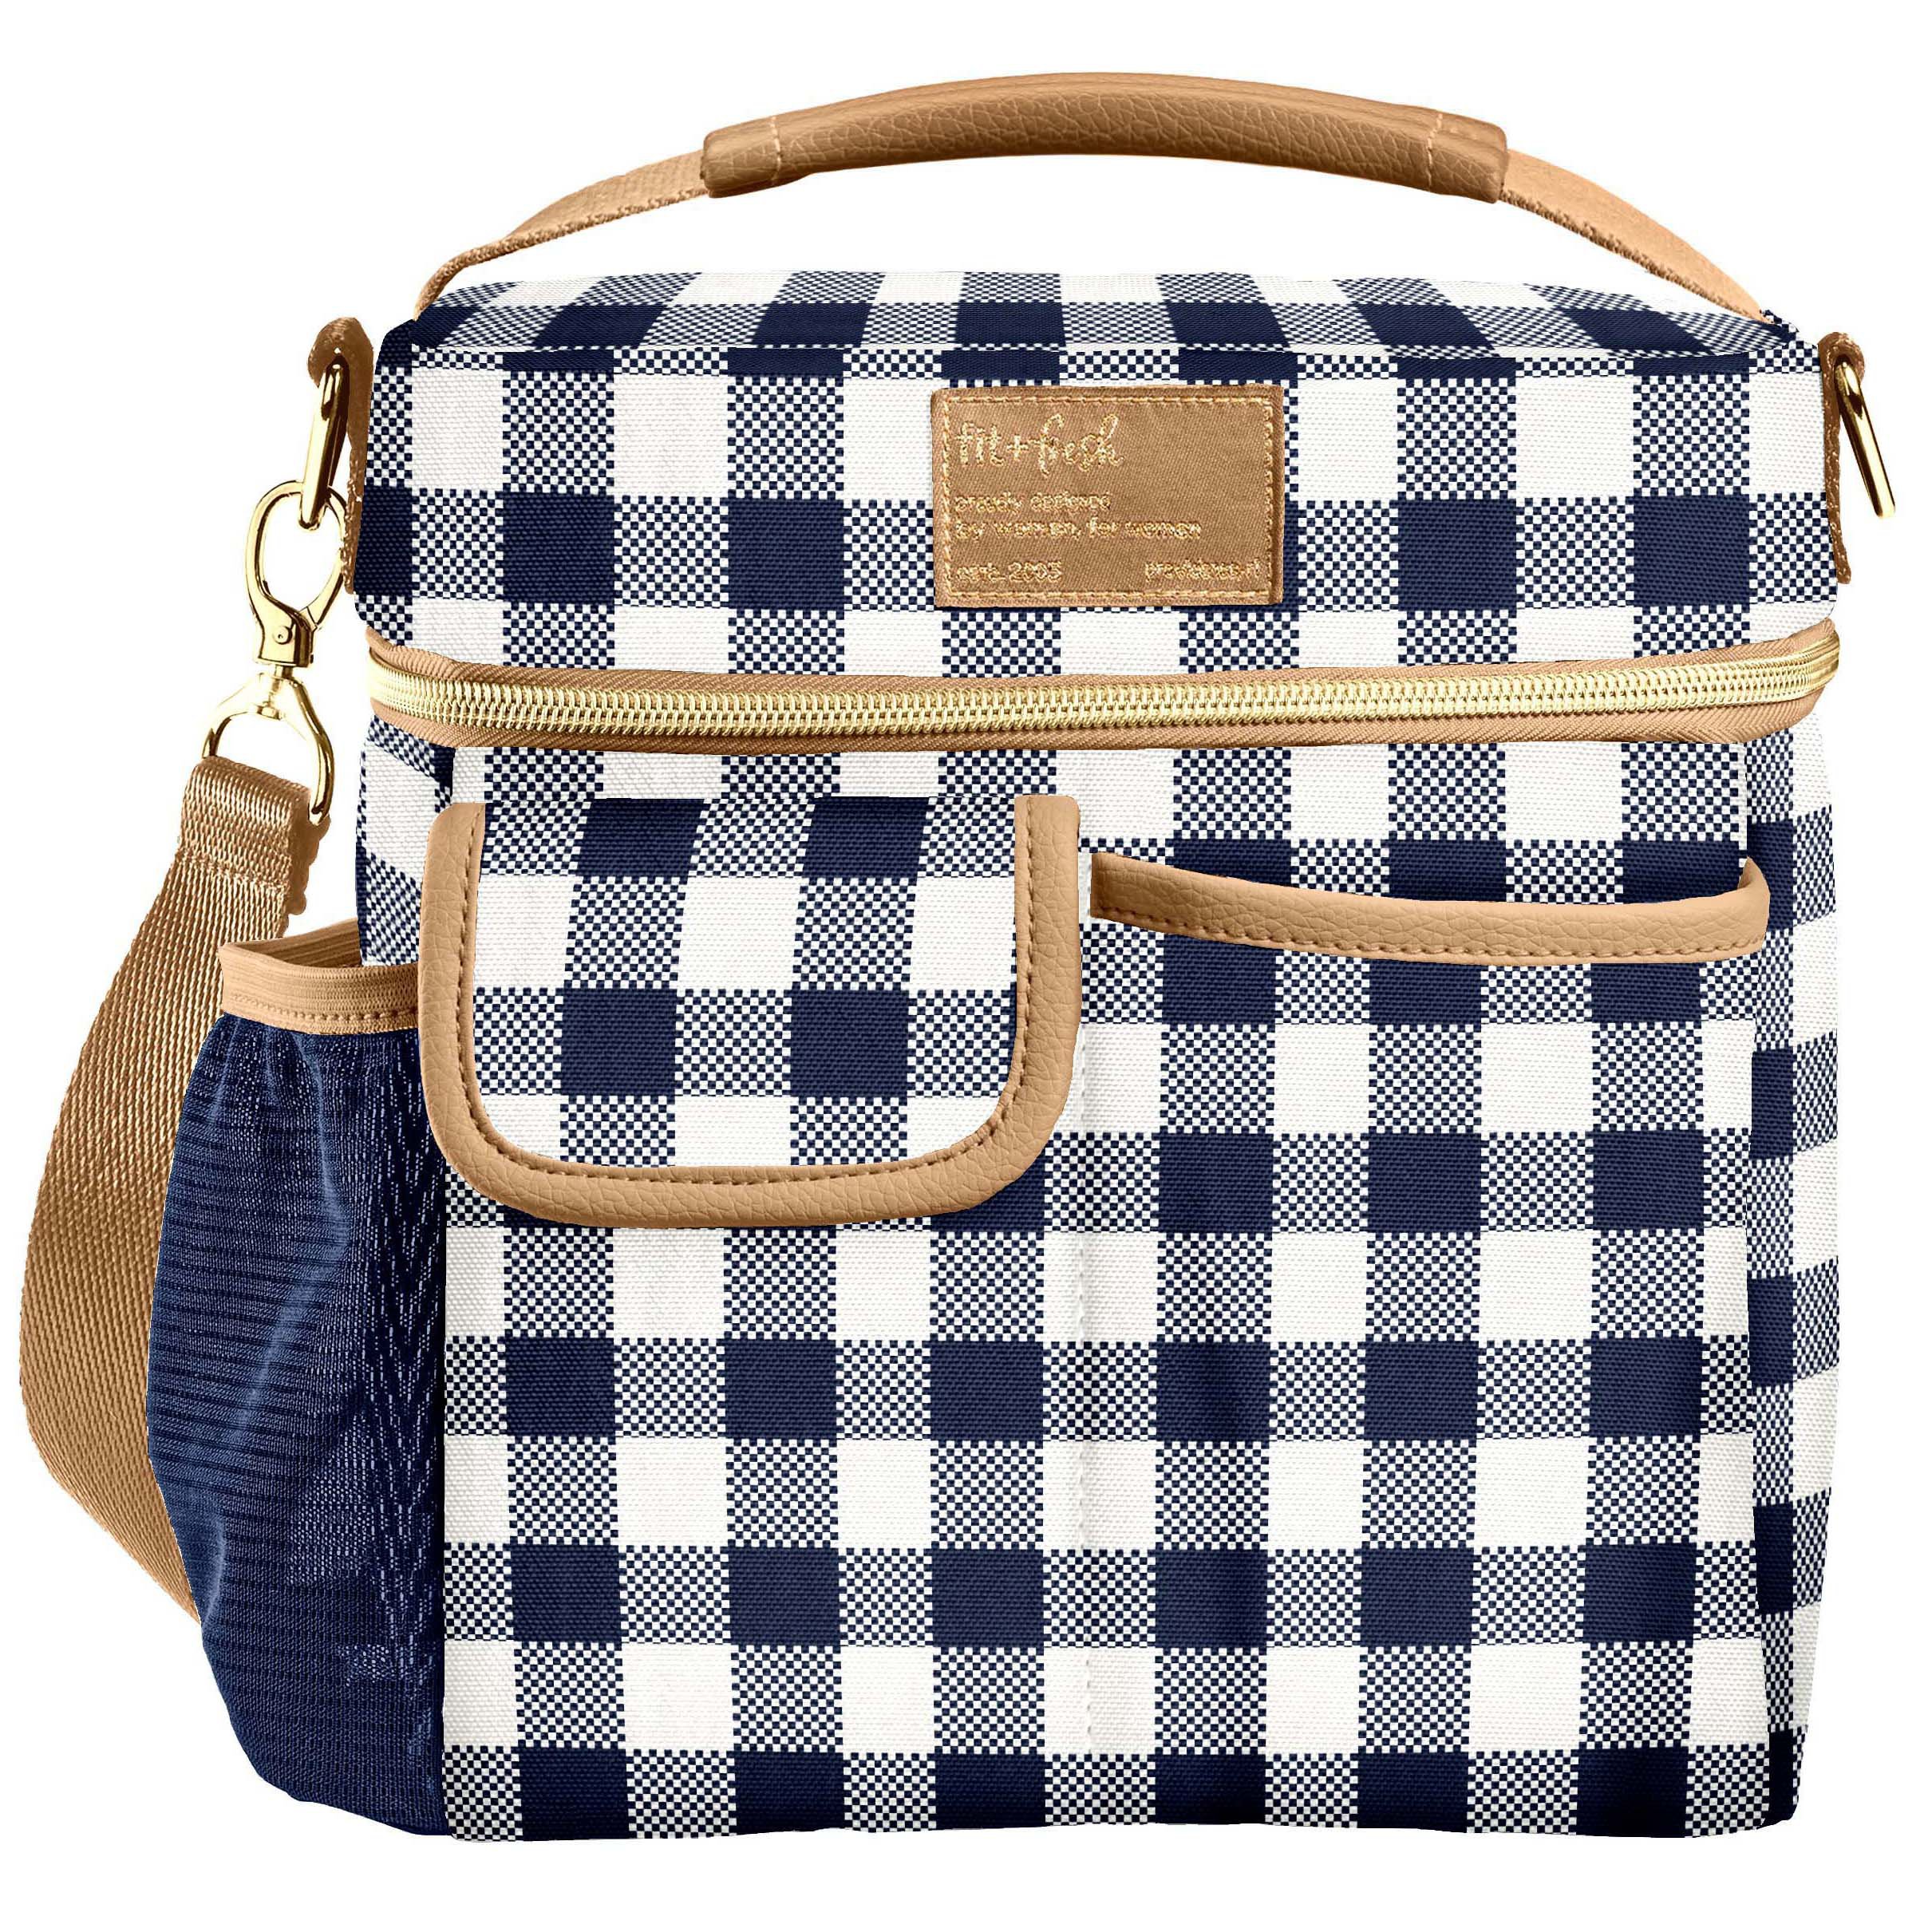 Take Away Insulated Bag - Gingham Mist - ElleB gifts